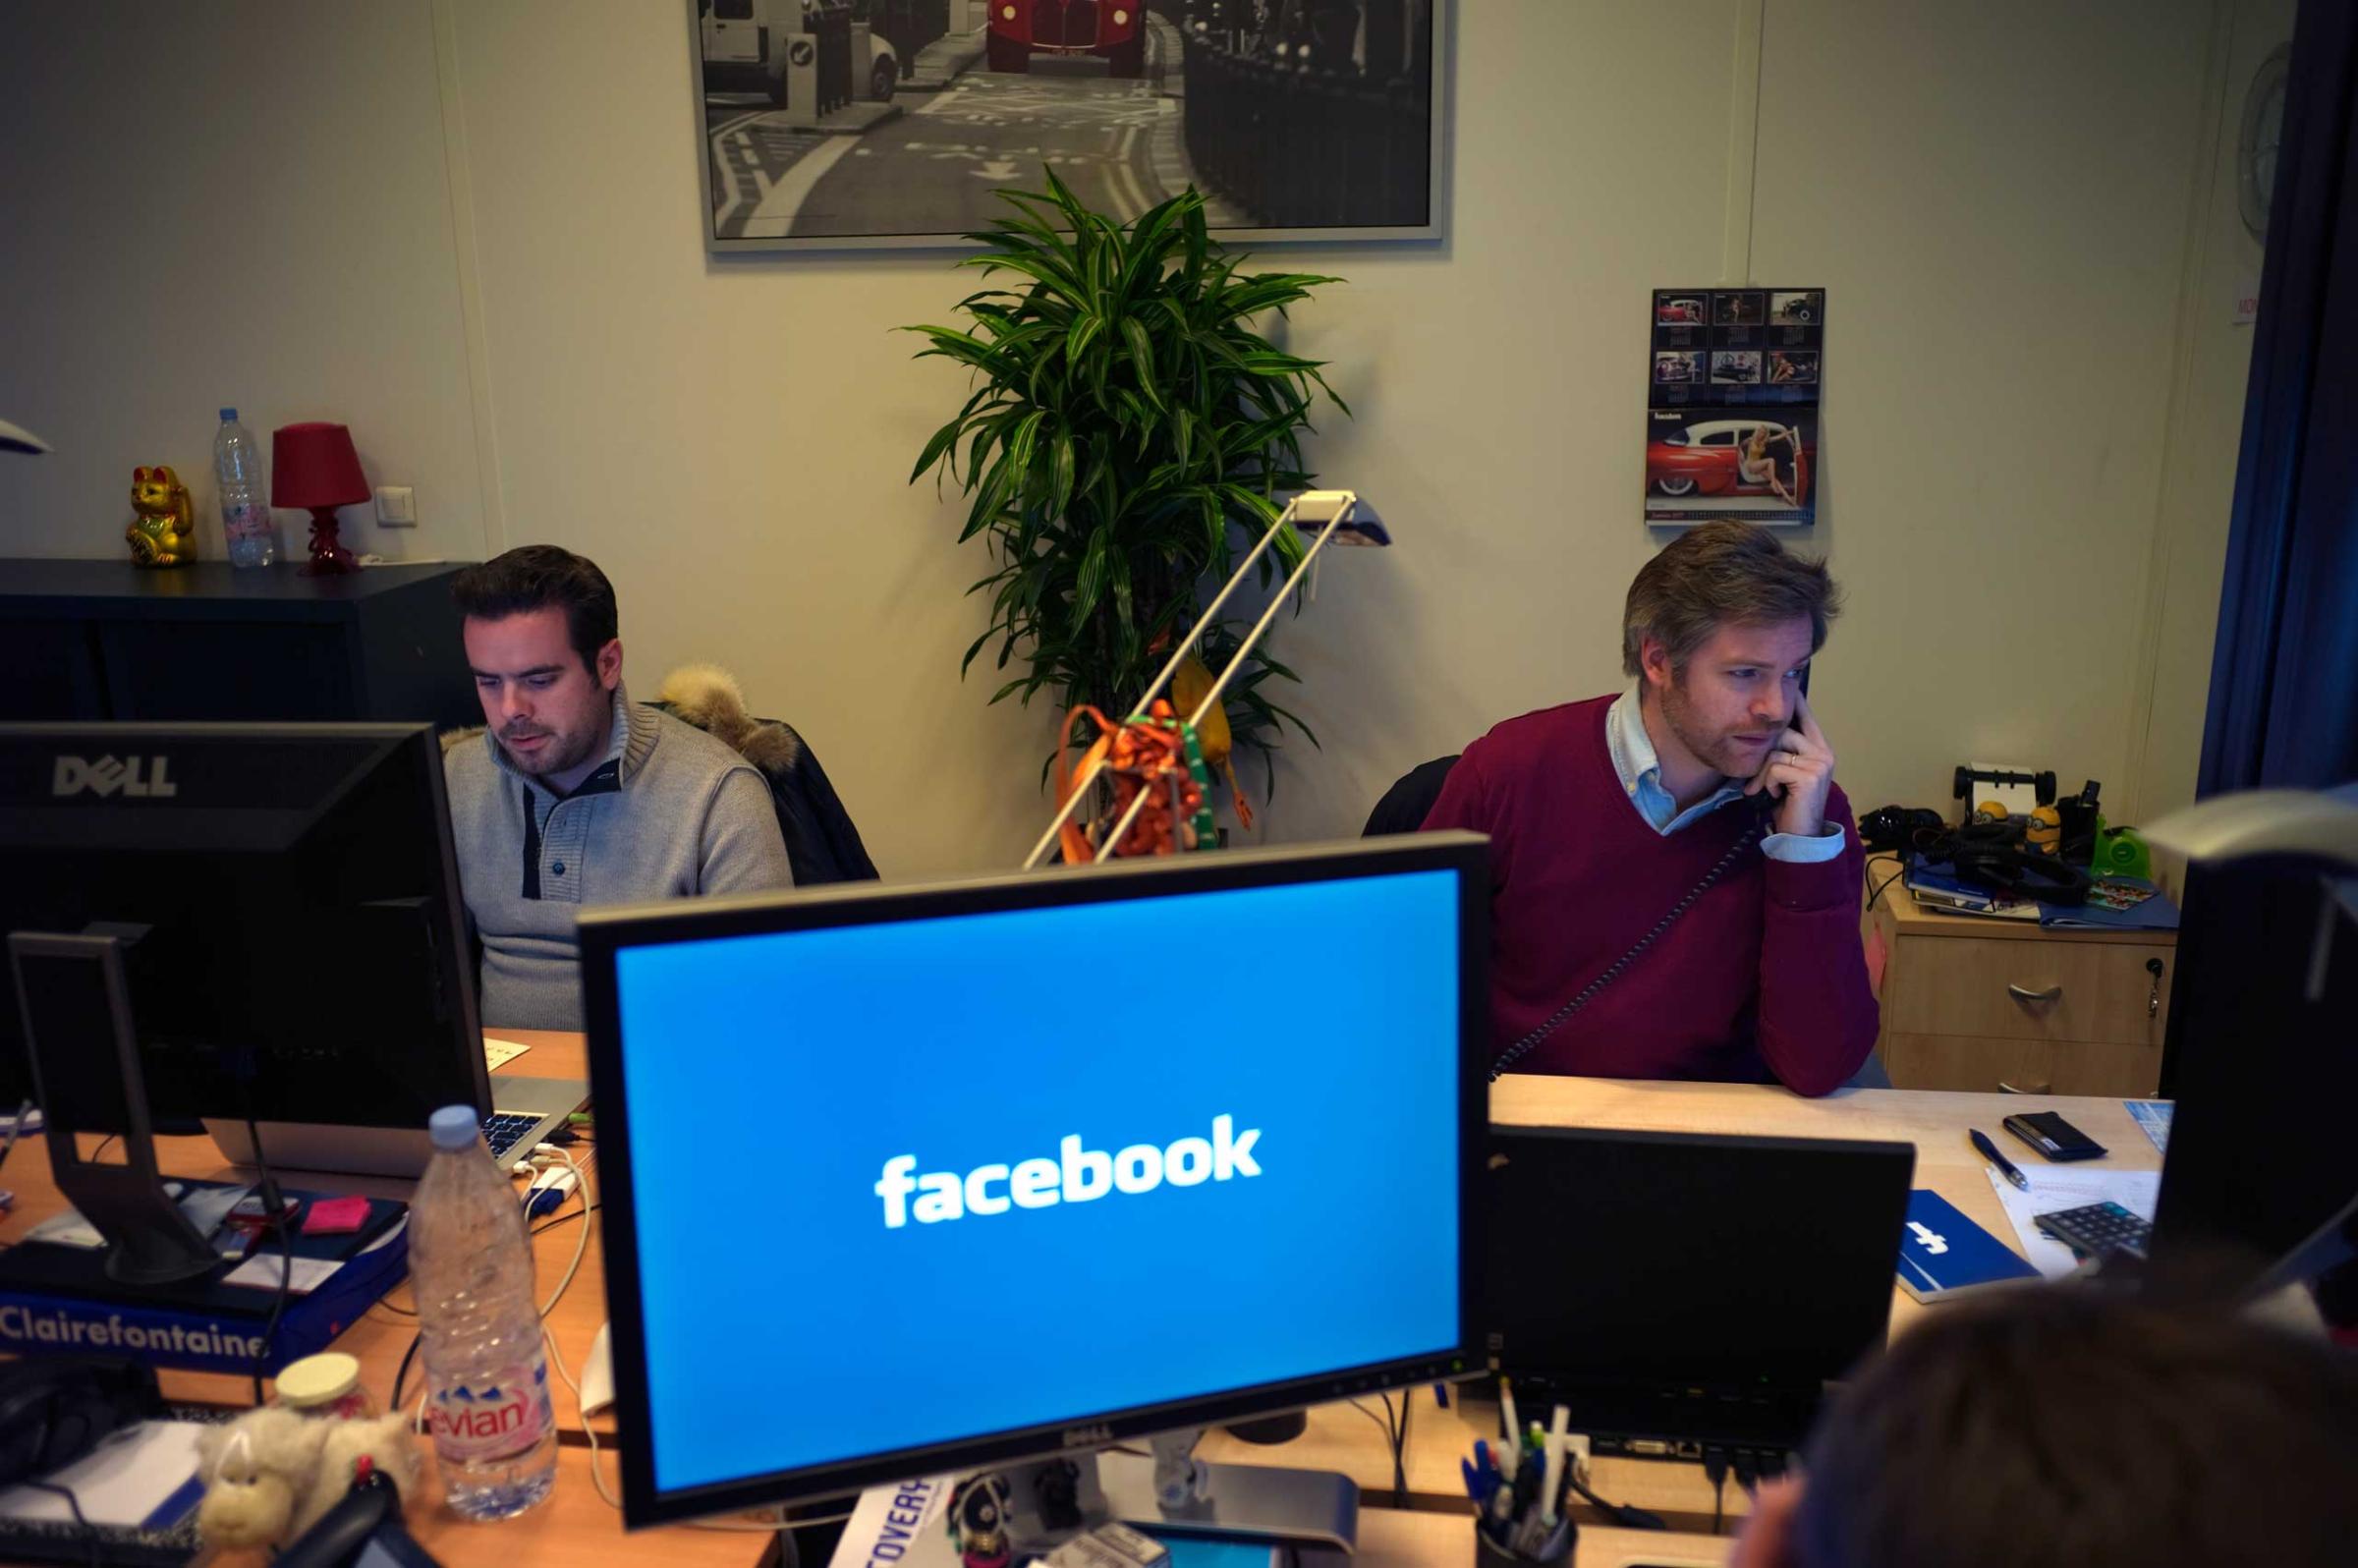 Facebook offices in Paris, France in 2010.